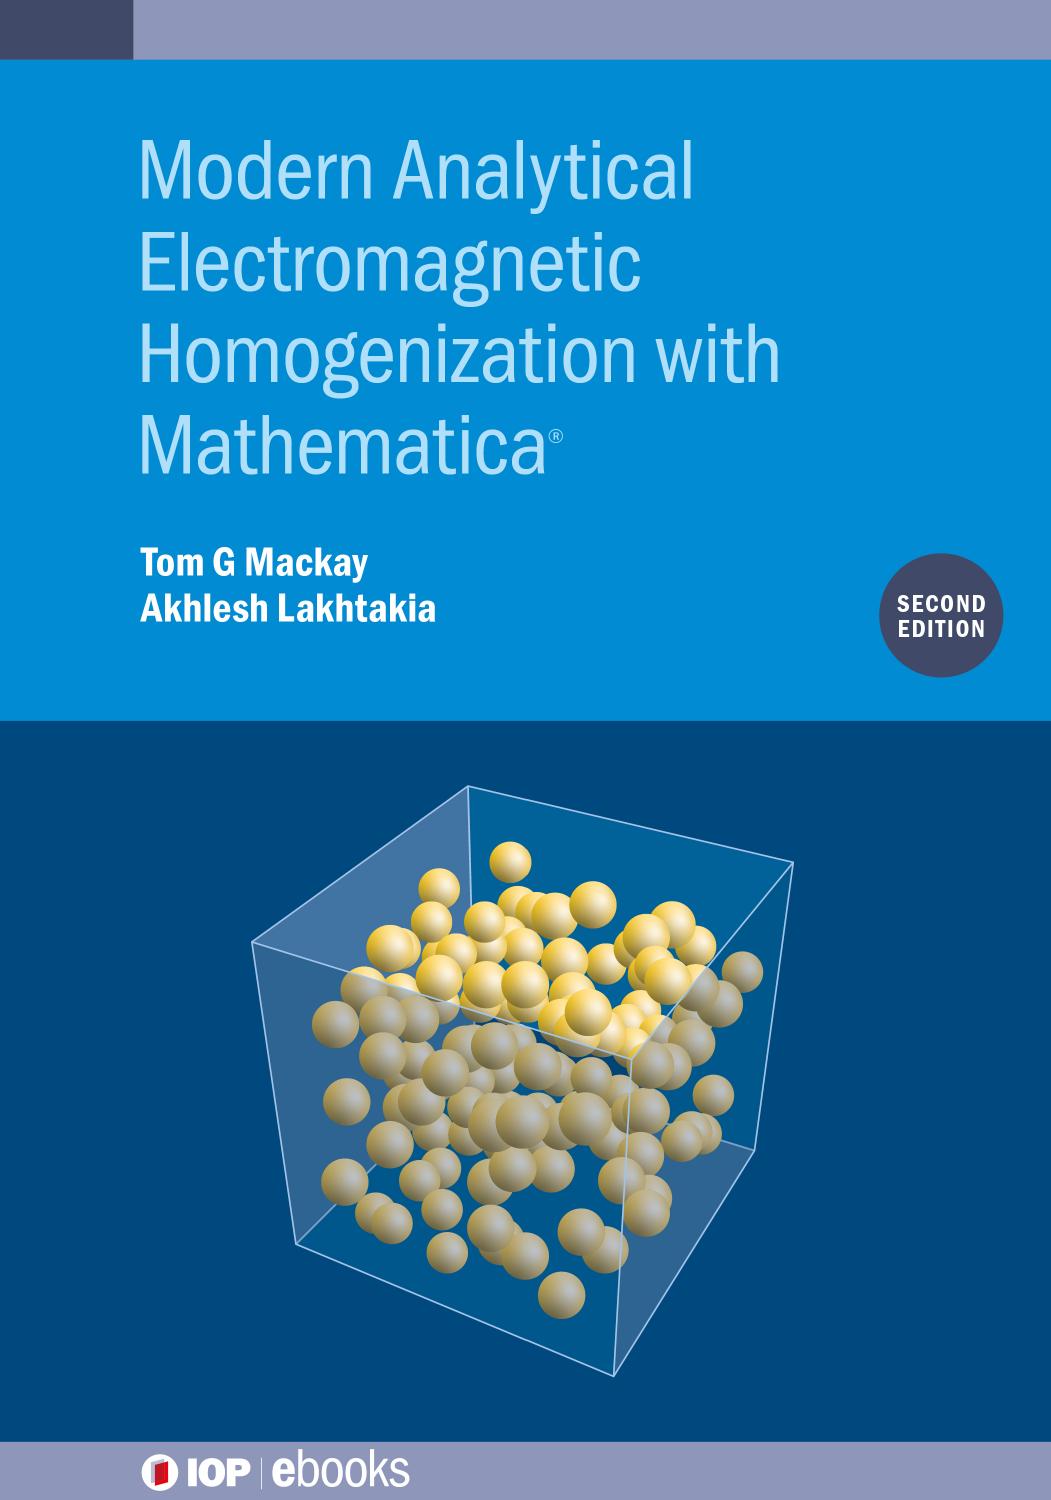 Modern Analytical Electromagnetic Homogenization with Mathematica®